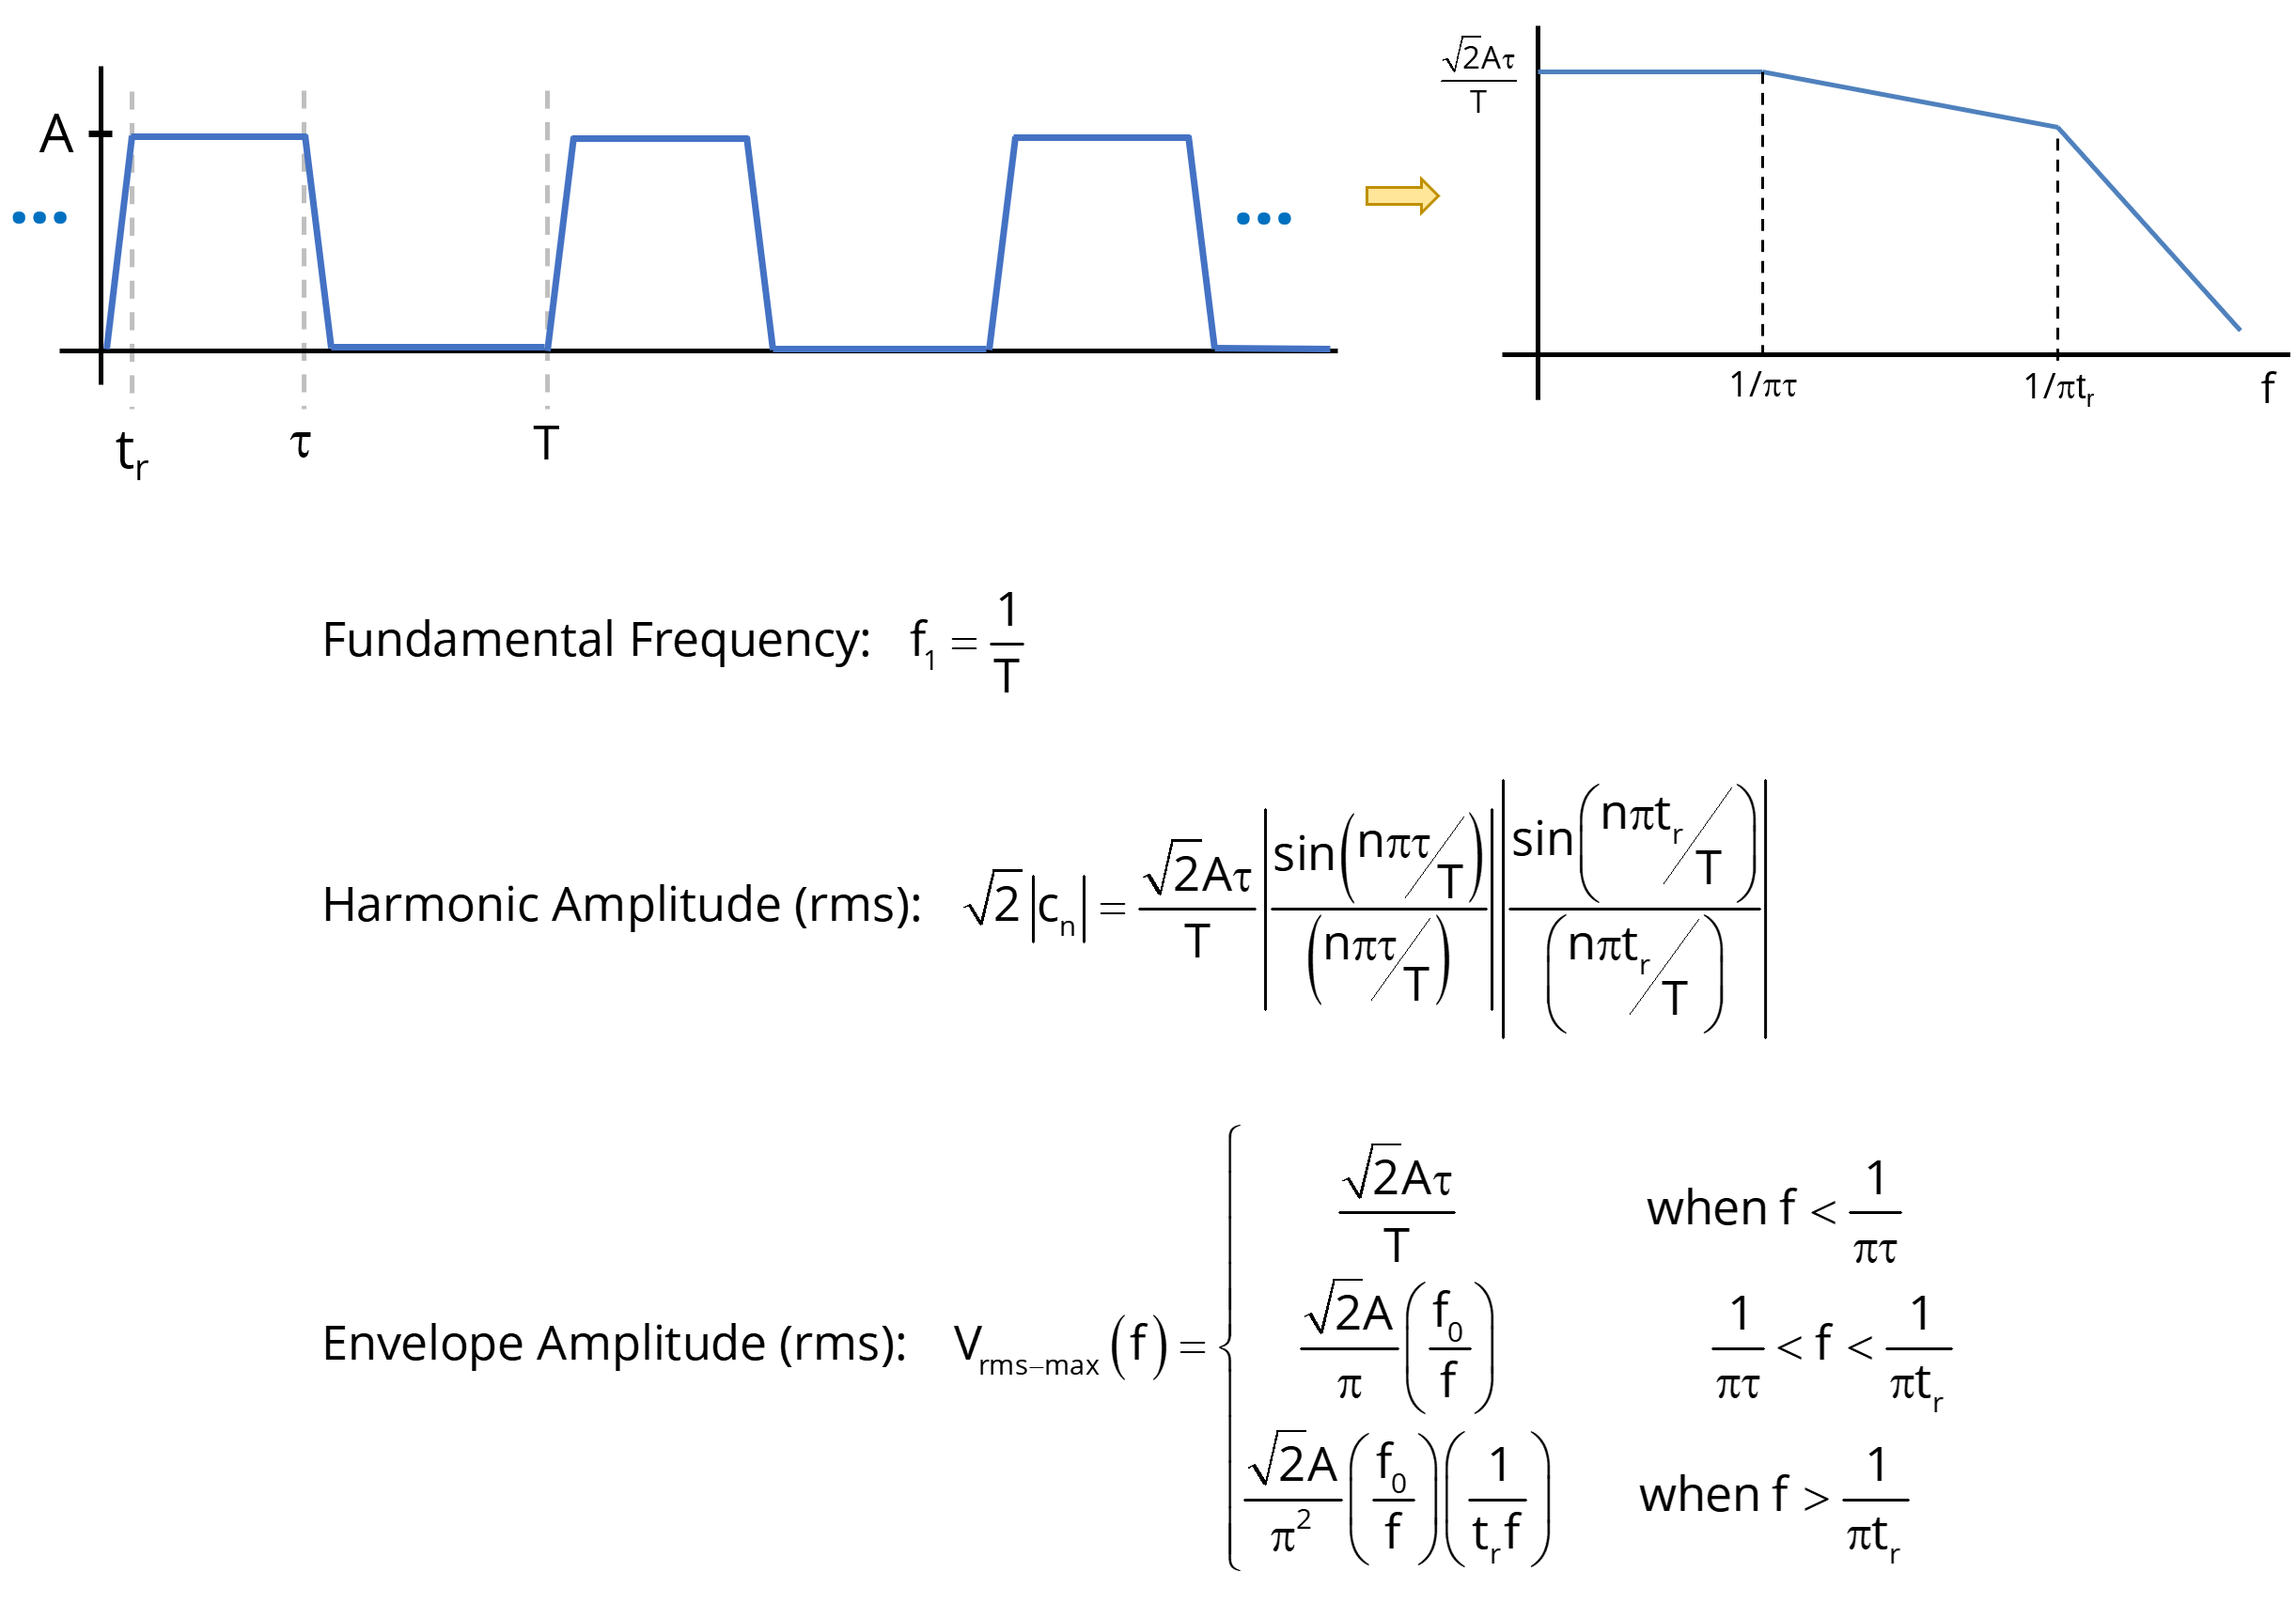 Illustration of a trapezoidal waveform and equations for calculating the amplitudes of the harmonics